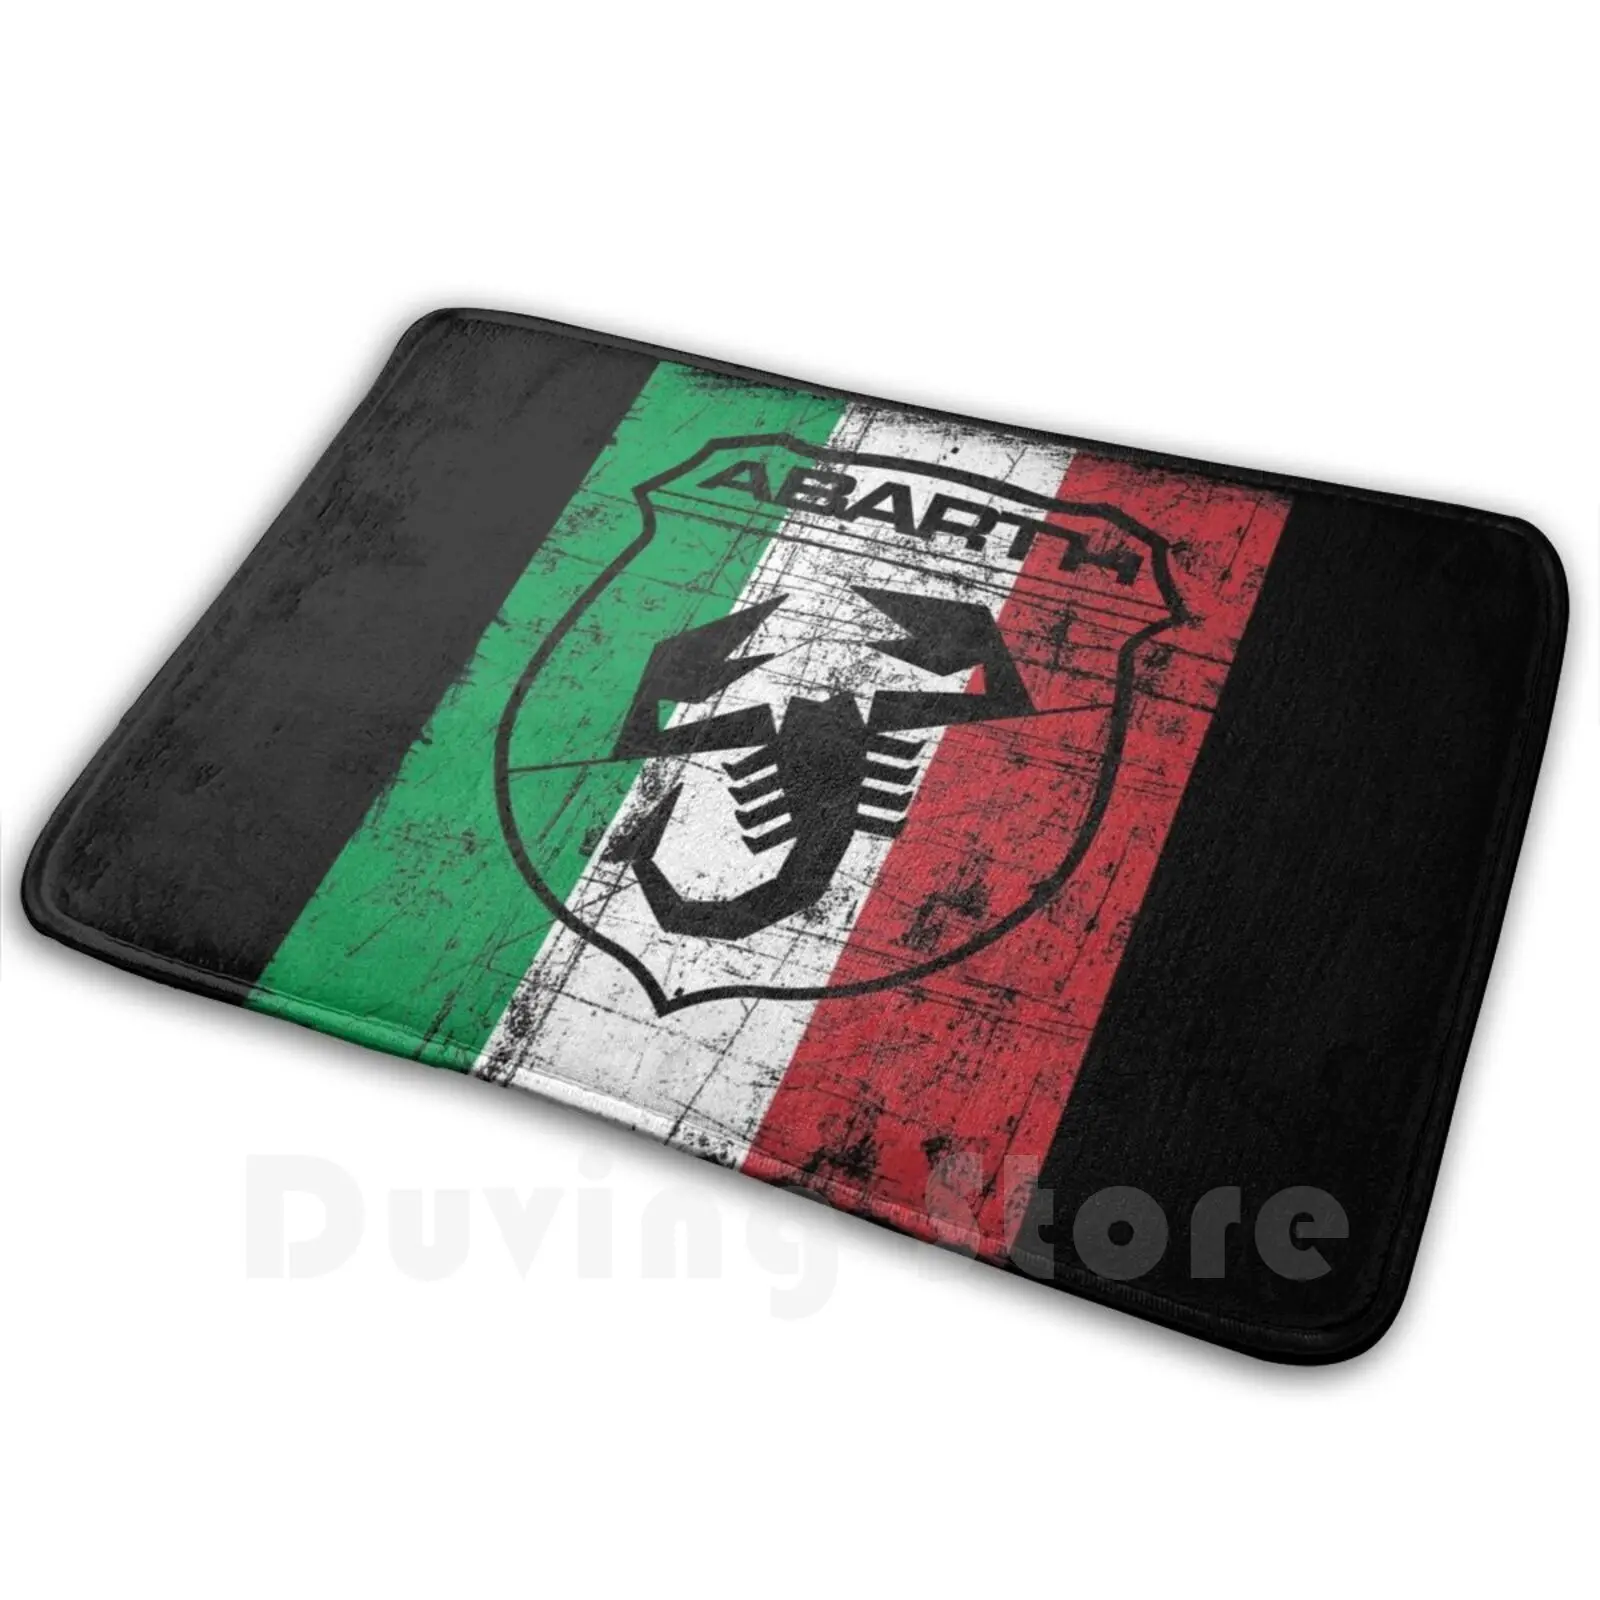 

Abarth Shield On Italy Flag Carpet Mat Rug Cushion Soft Non-Slip Abarth Scorpion Flag Italy Tricolor Red Black Cars